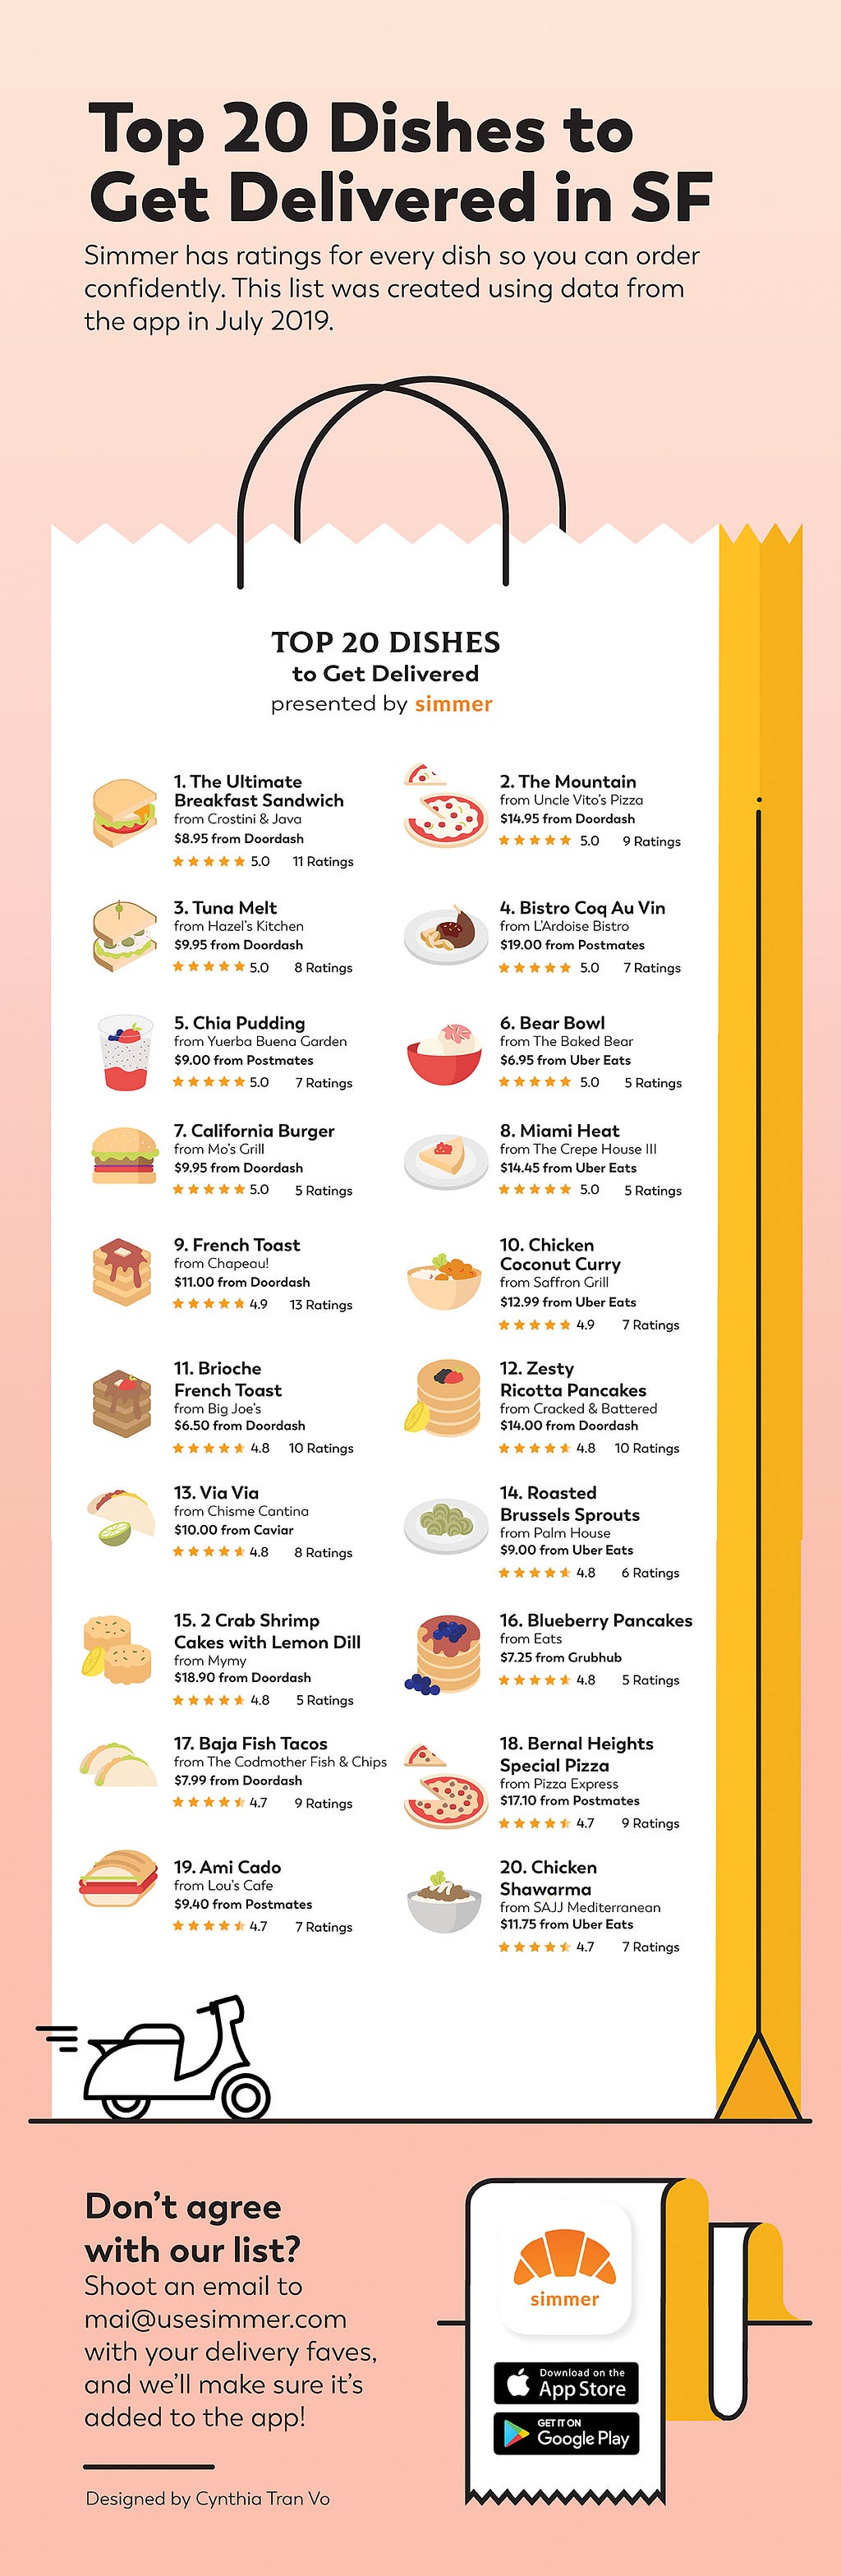 An infographic listing the top 20 delivery dishes on Simmer as of July 2019.